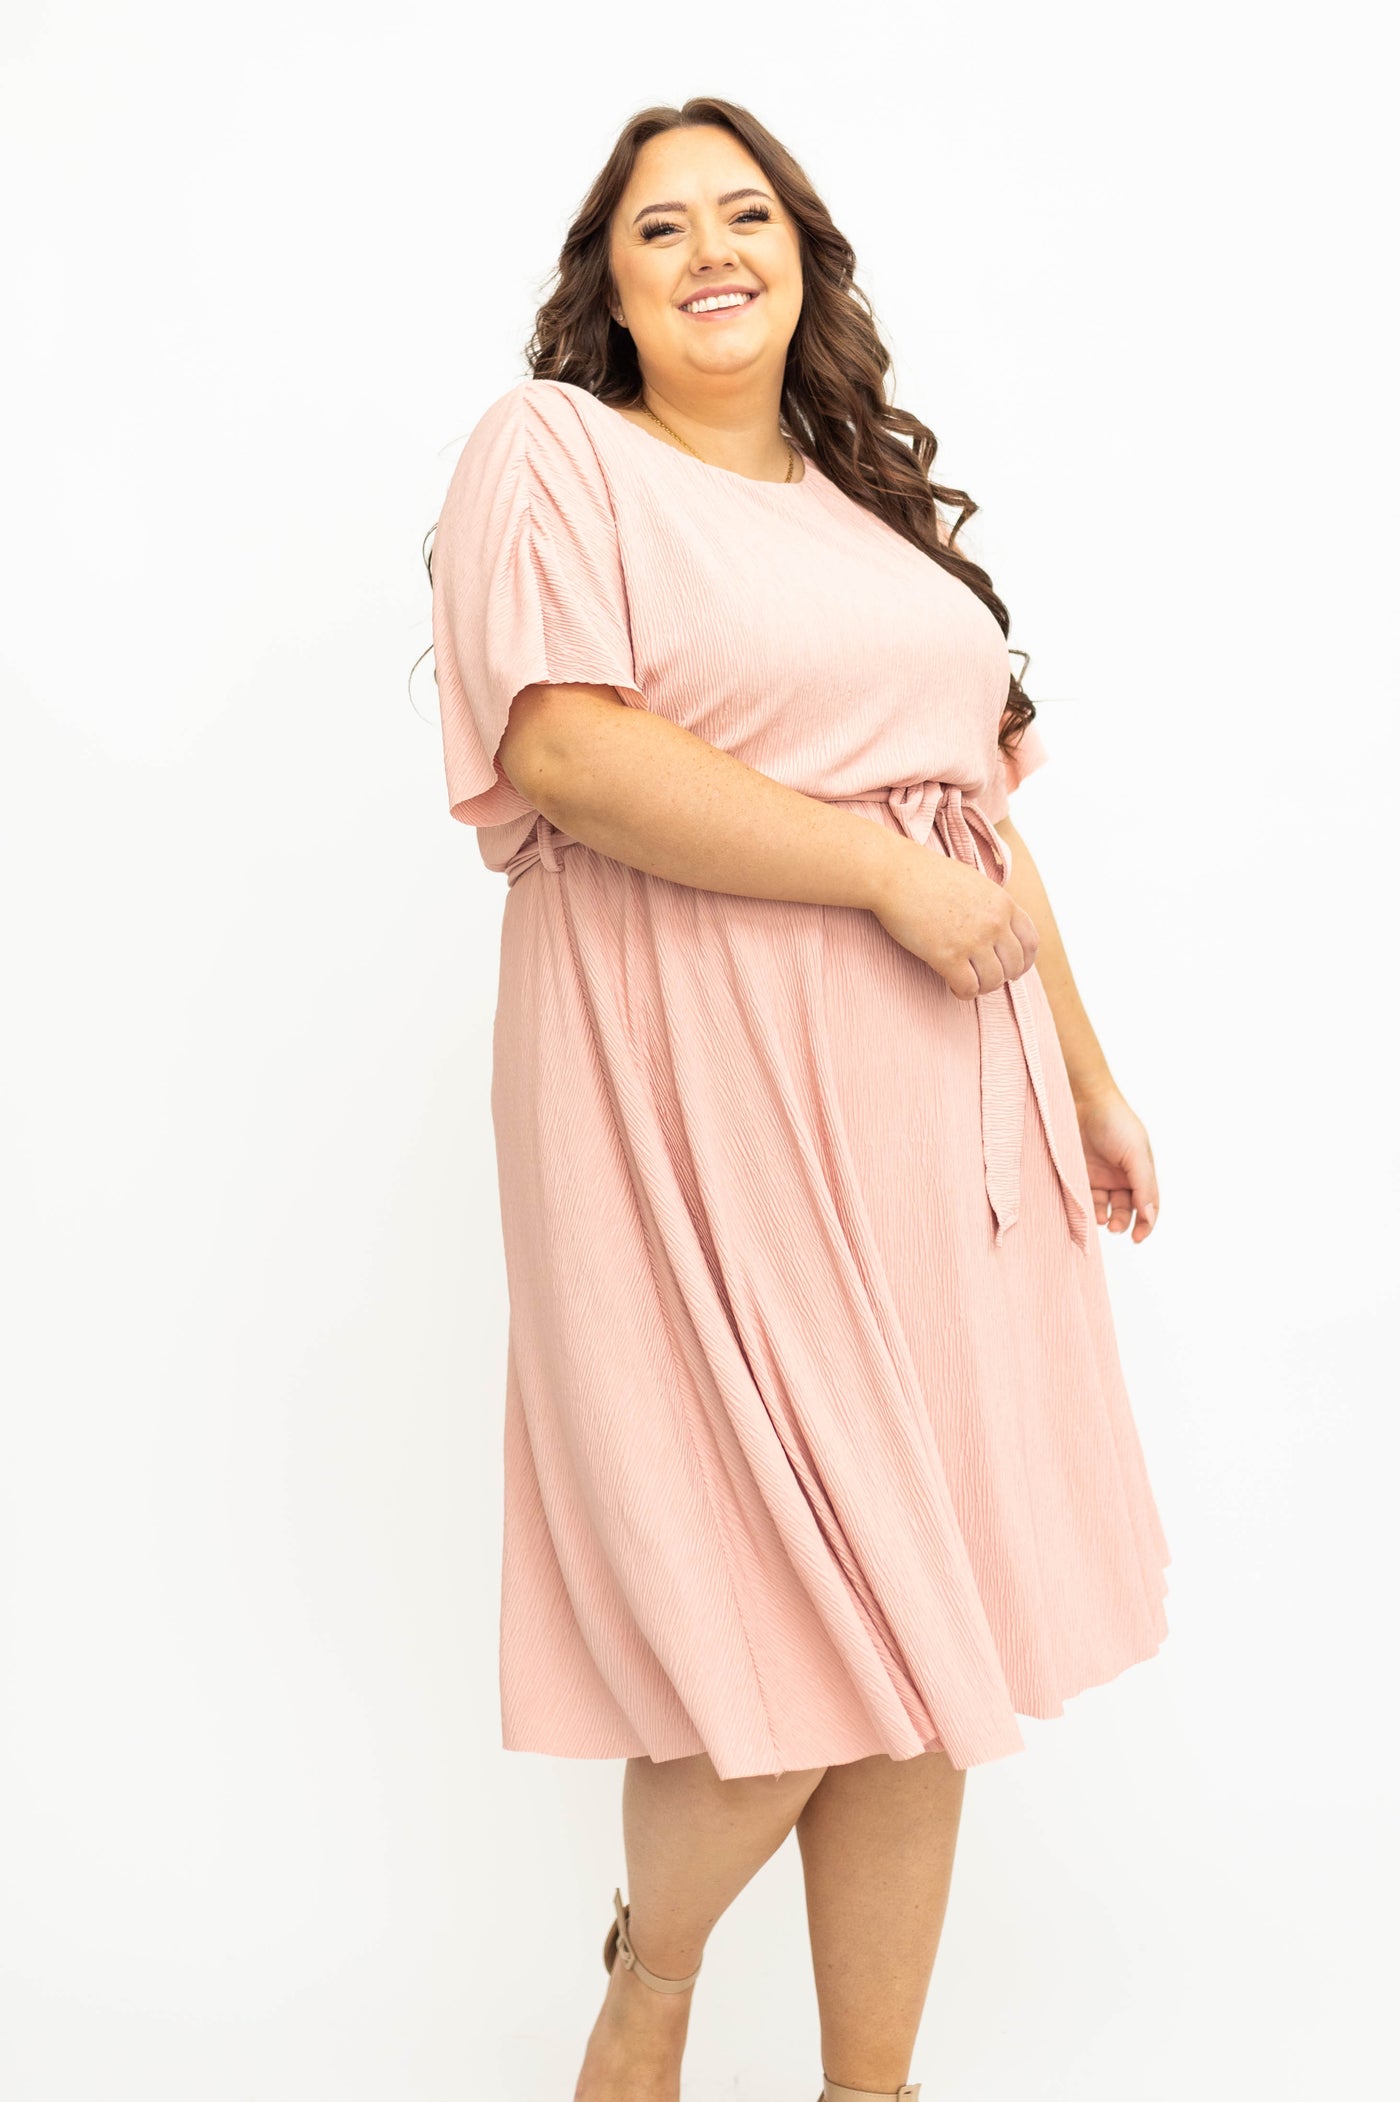 Plus size pink dress that ties at the waist